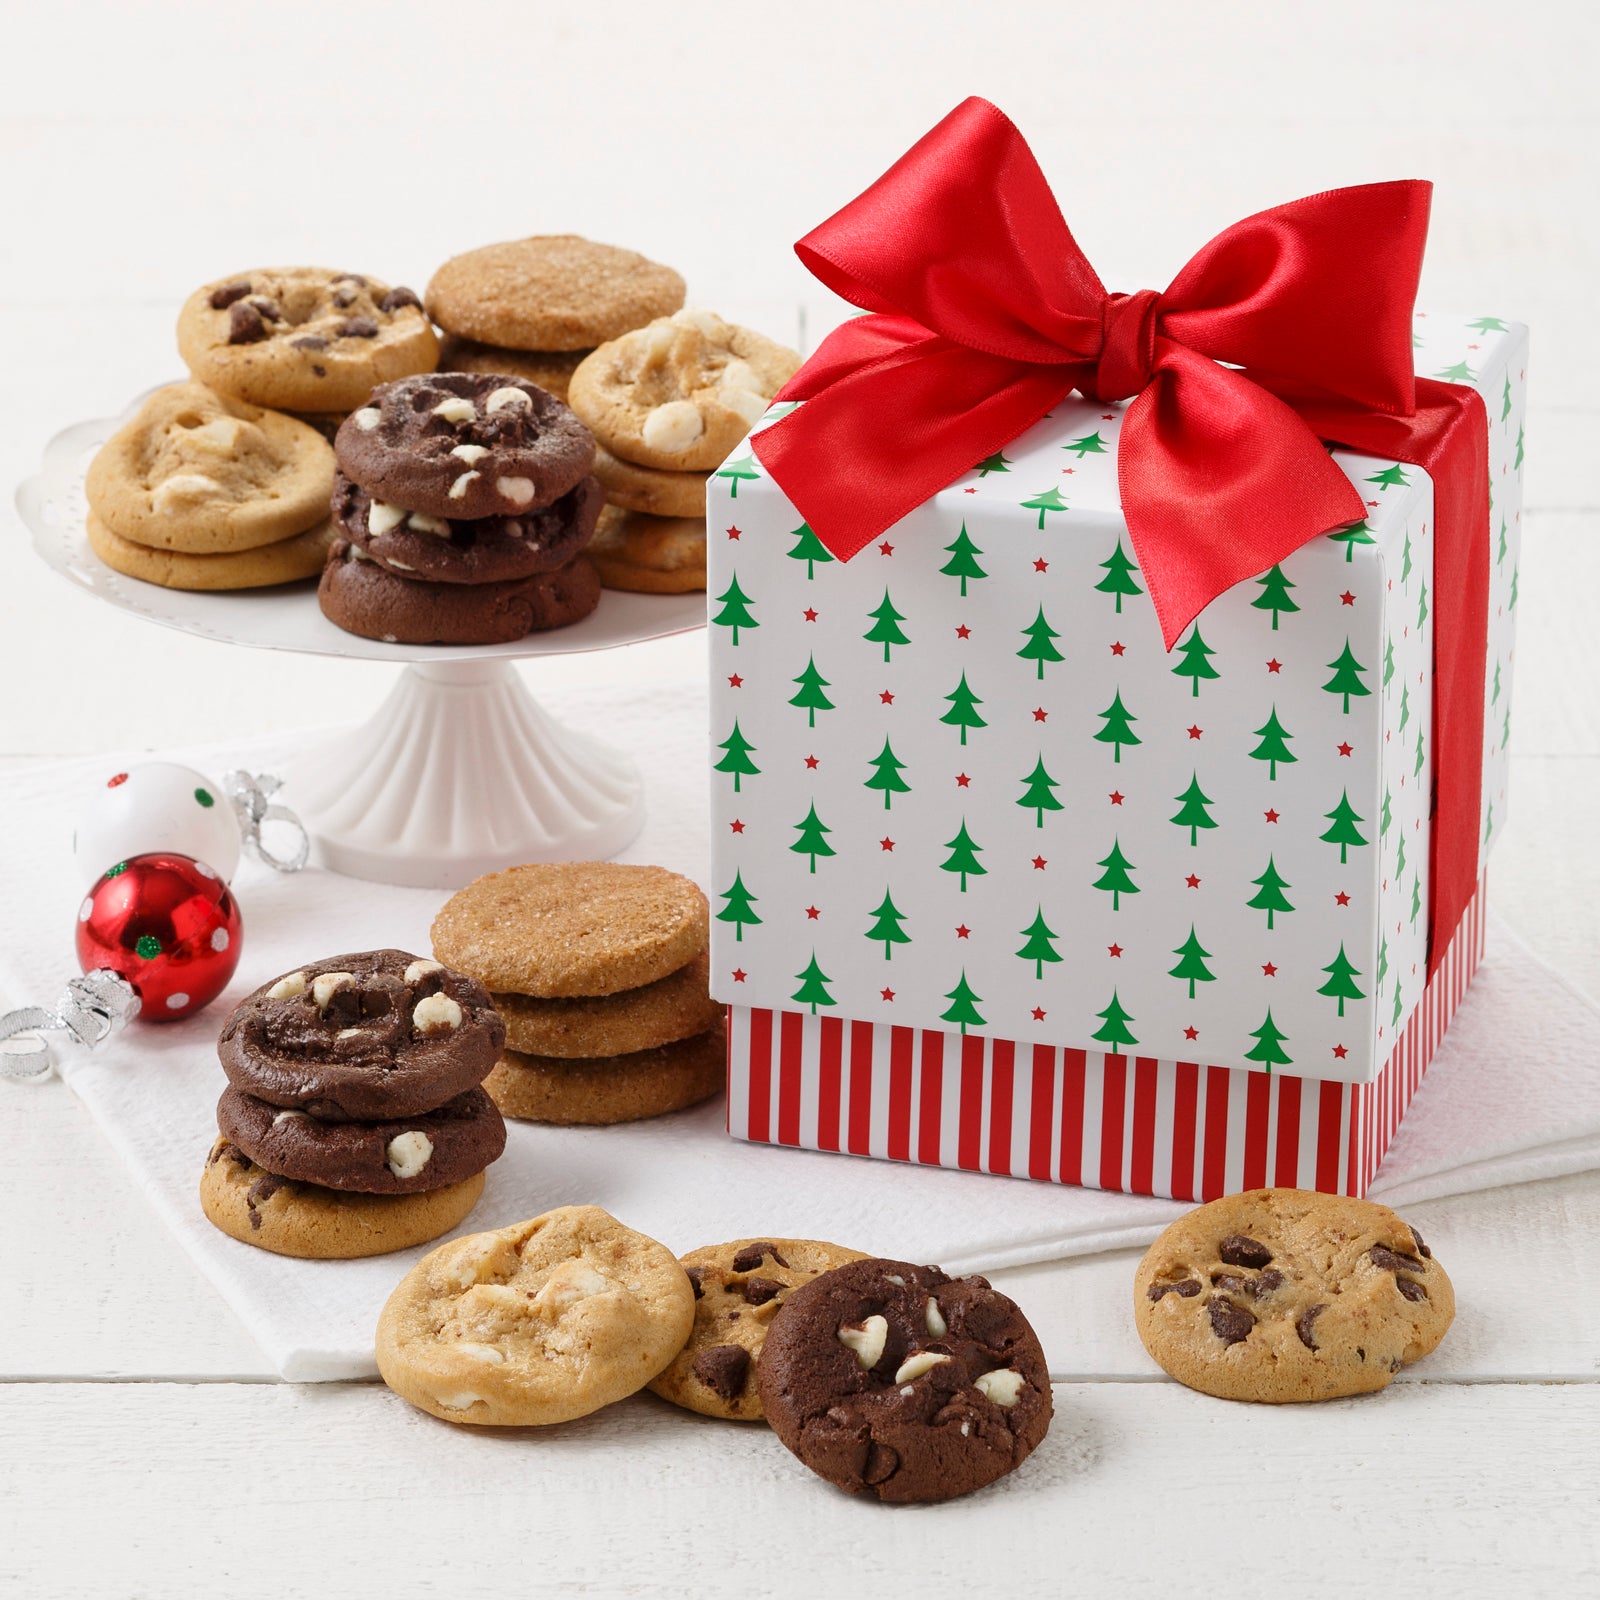 Mini gift box with a Christmas trees on the top and a red and white striped base. There is an assortment of Nibblers® surrounding the gift box